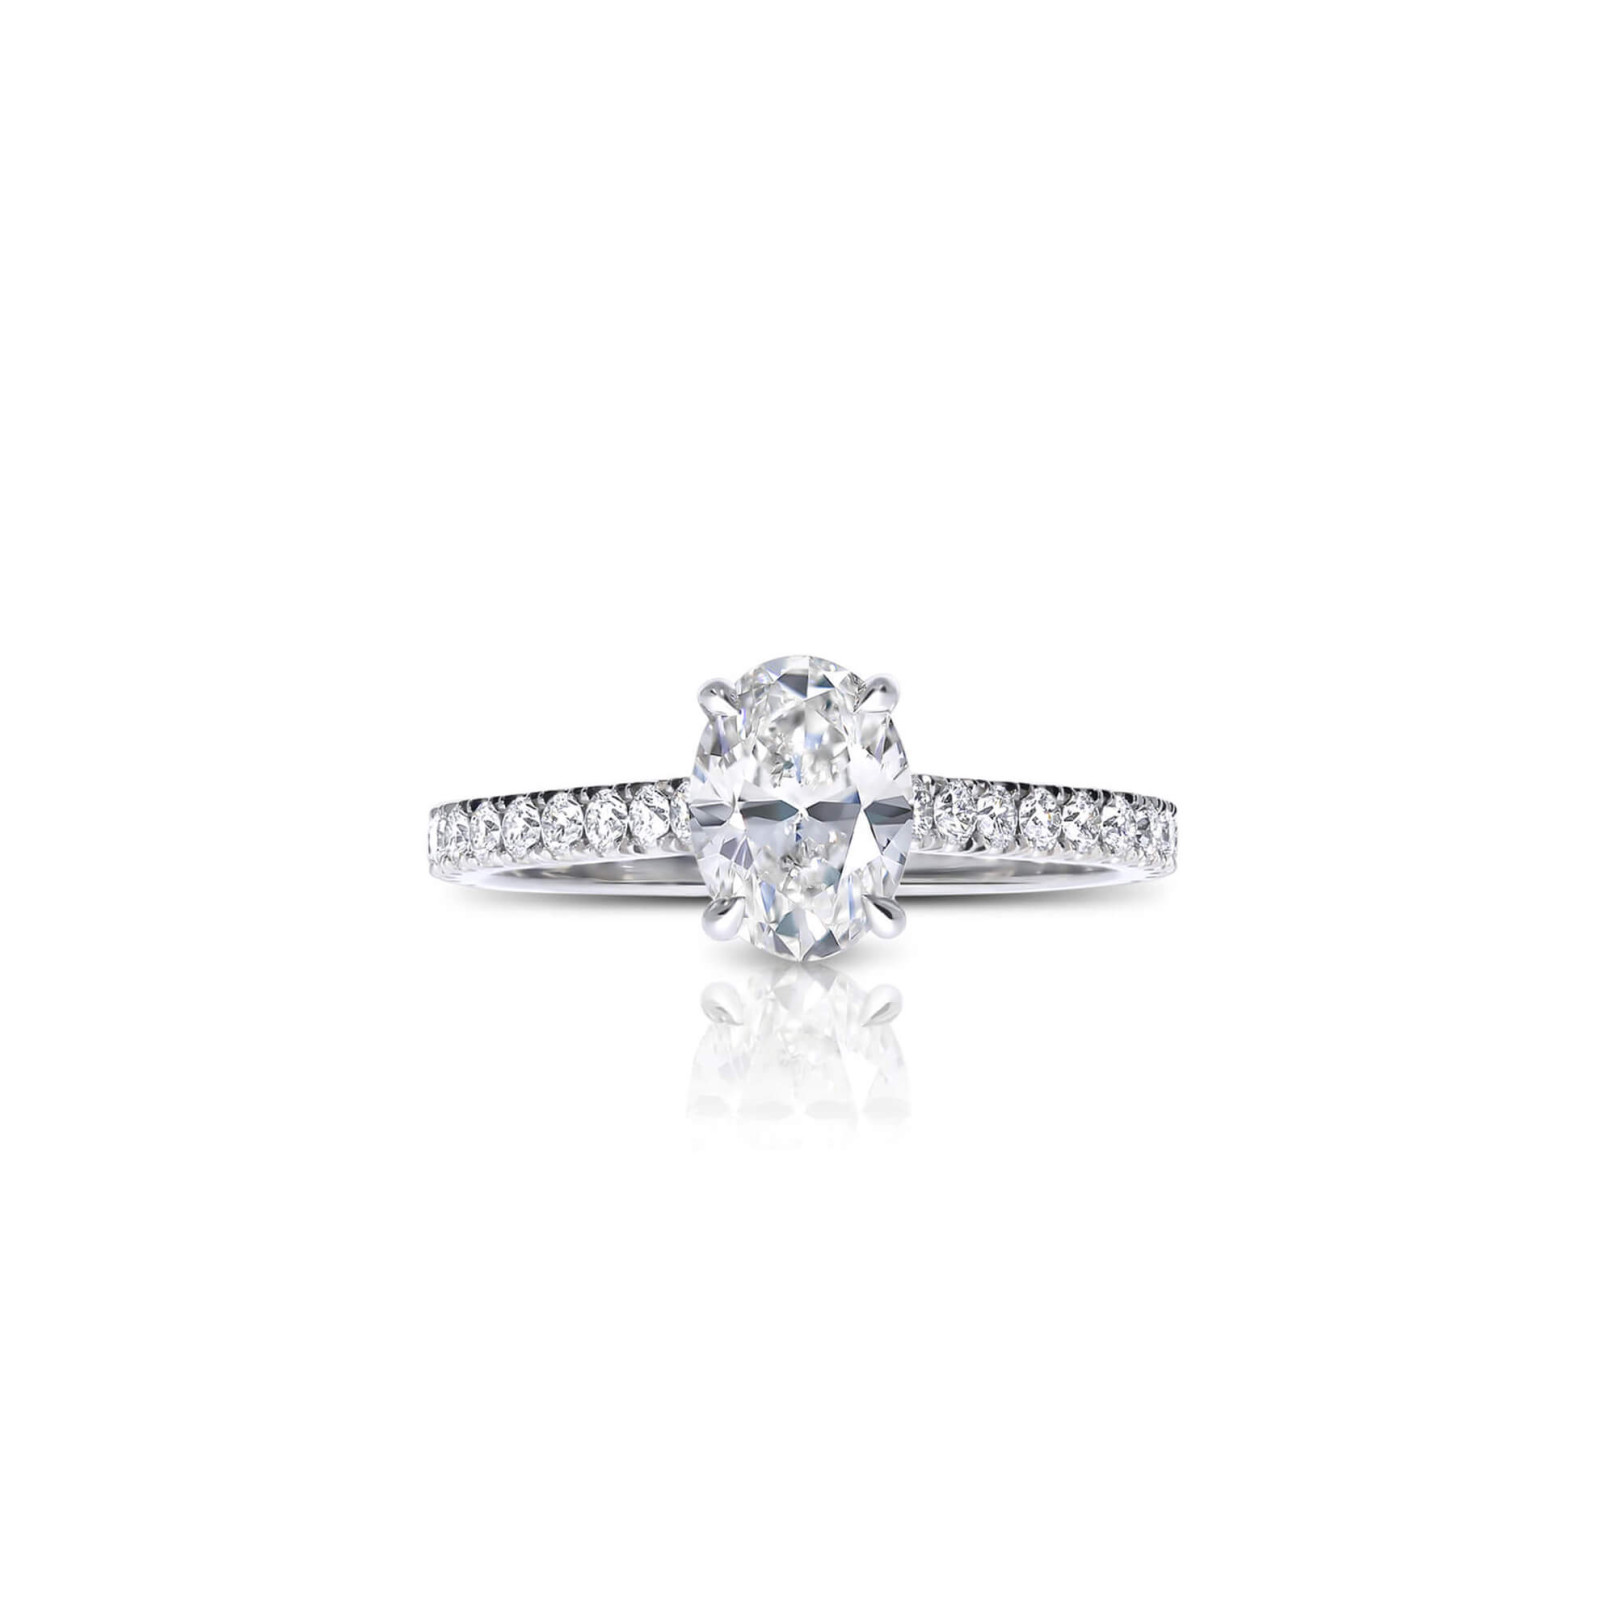 Oval Diamond Engagement Ring with Scallop Set Diamond Shoulders